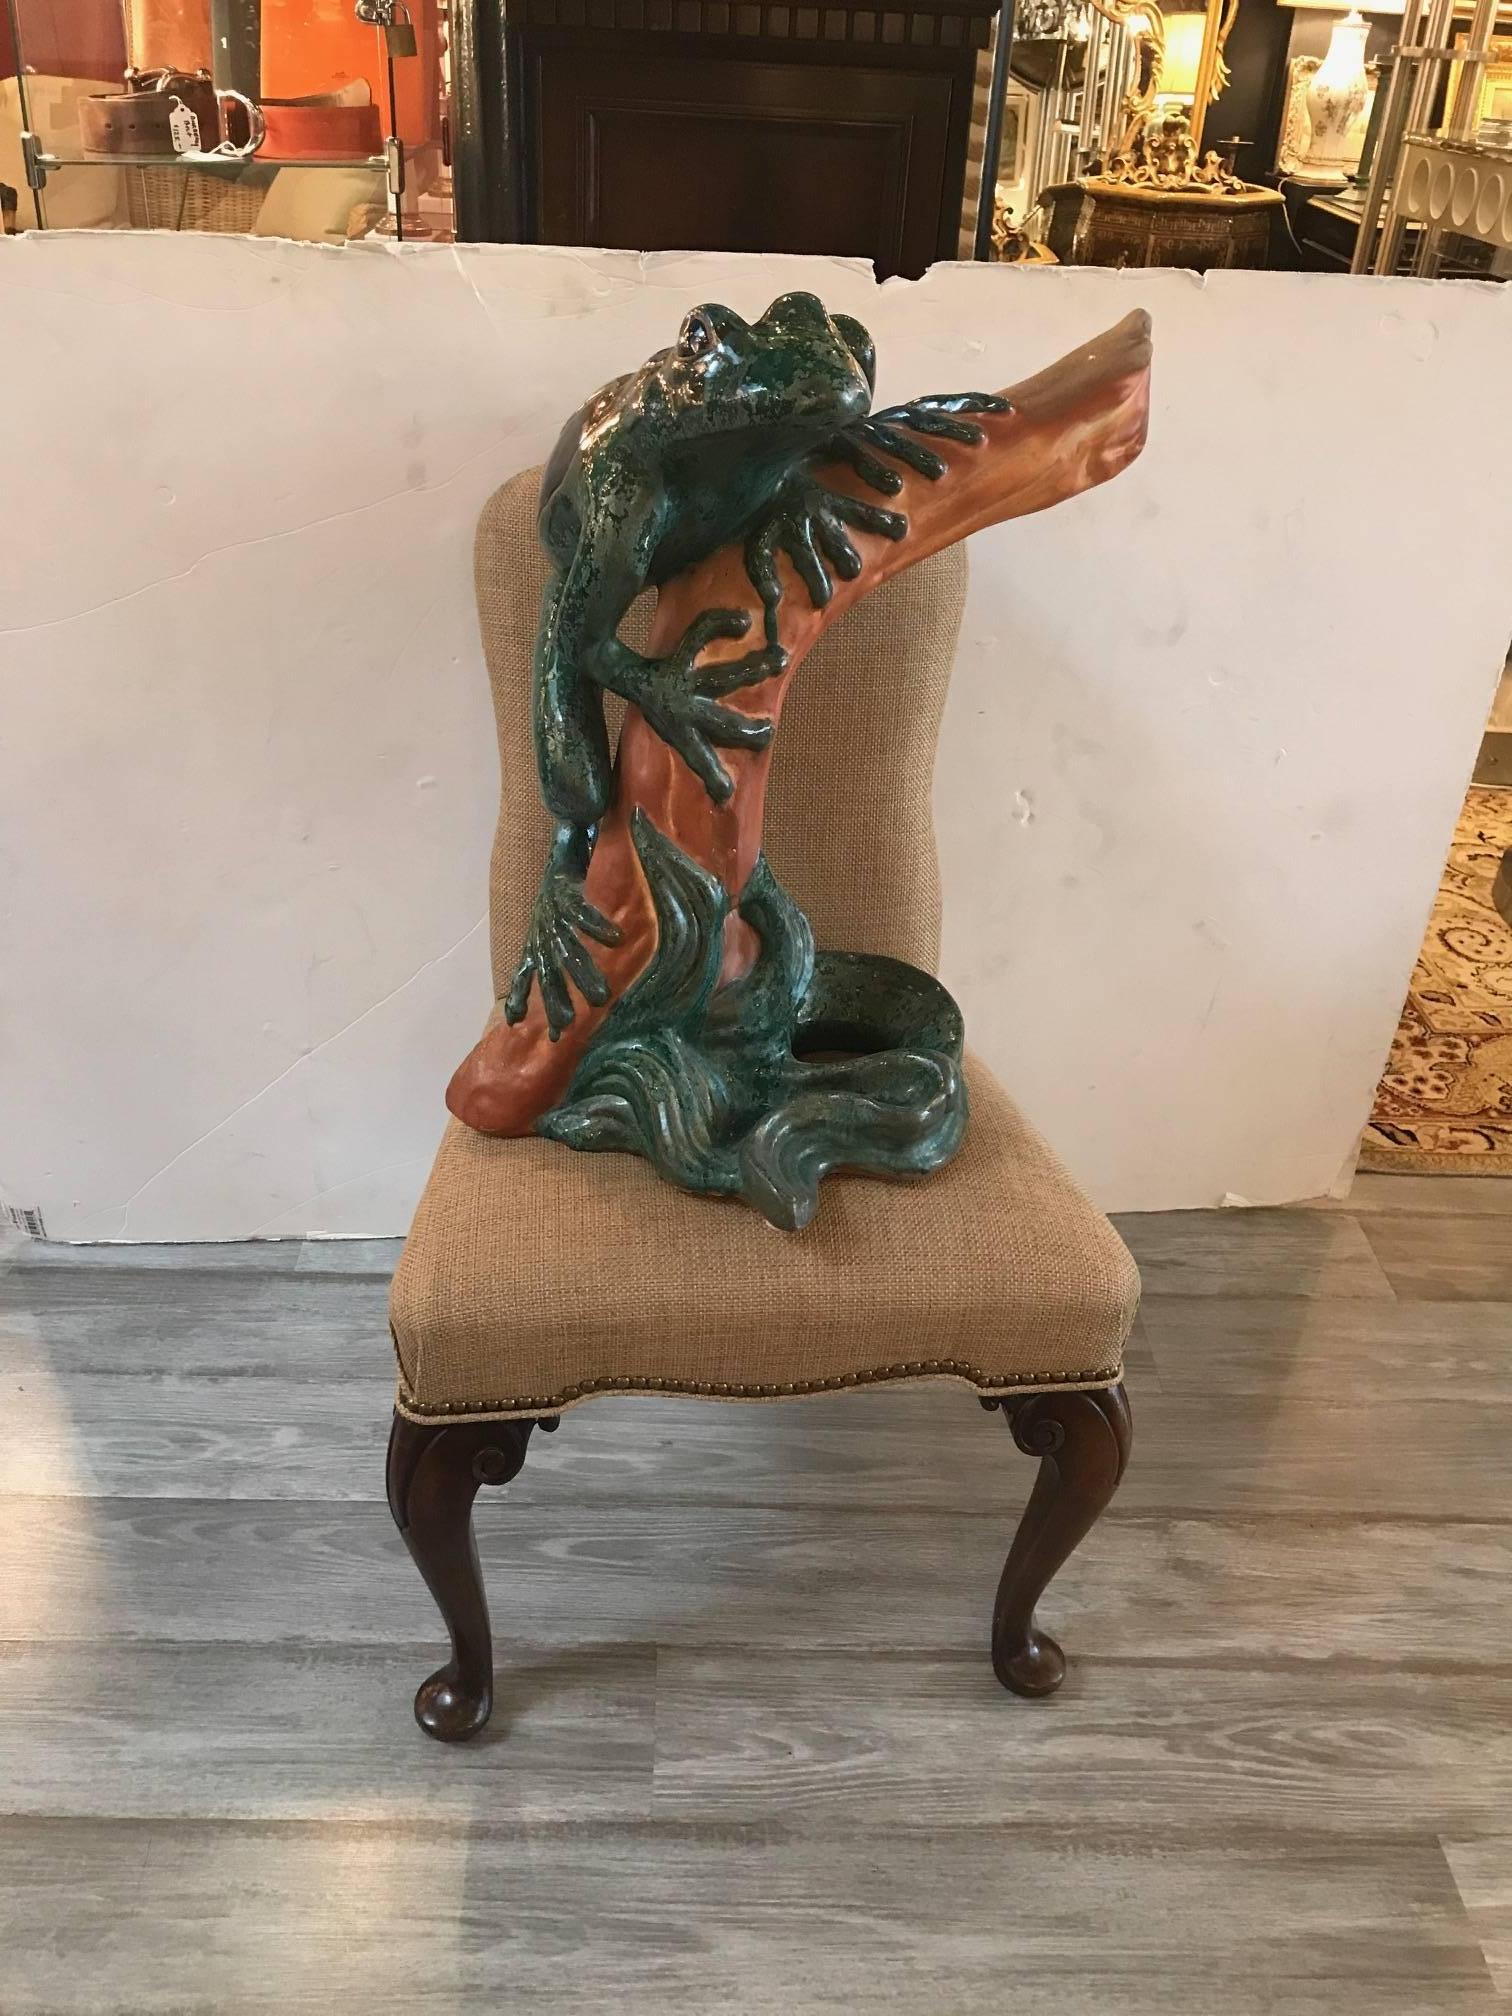 Large Whimsical Italian Frog Sculpture 2